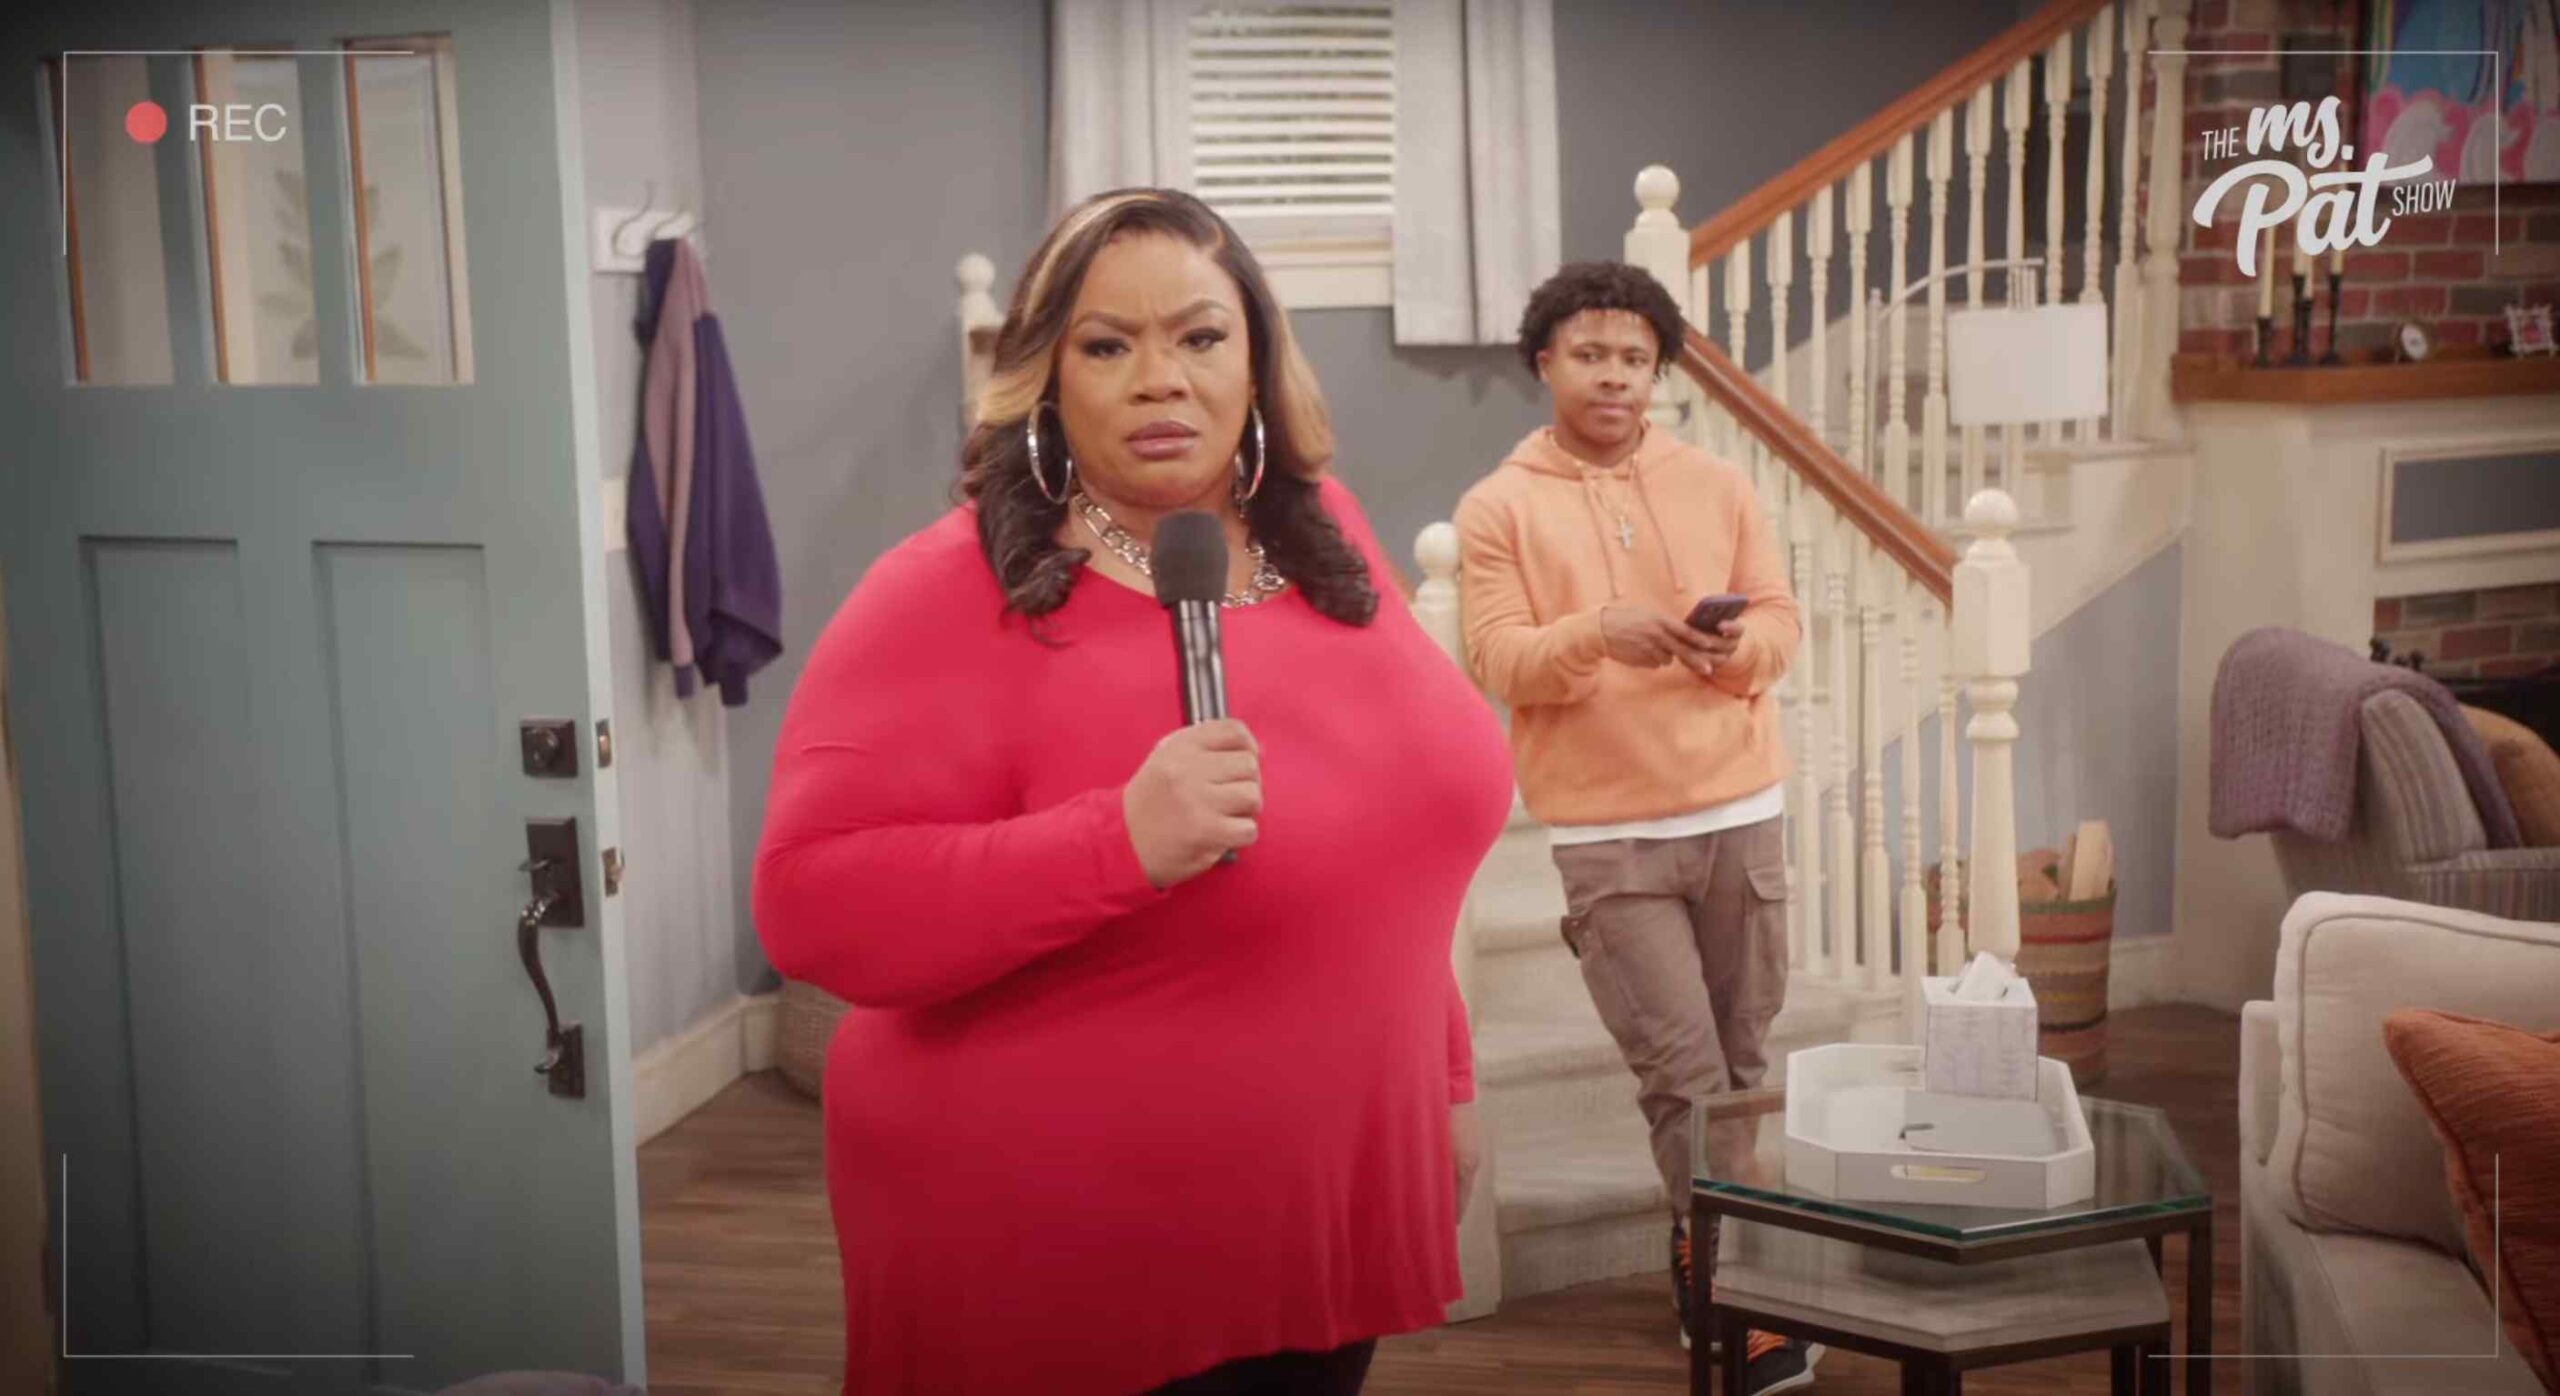 'The Ms. Pat Show' Season 4 Trailer: Golden Brooks, Tommy Davidson, Richard Lawson And More Guest Star In BET+'s Emmy-Nominated Sitcom